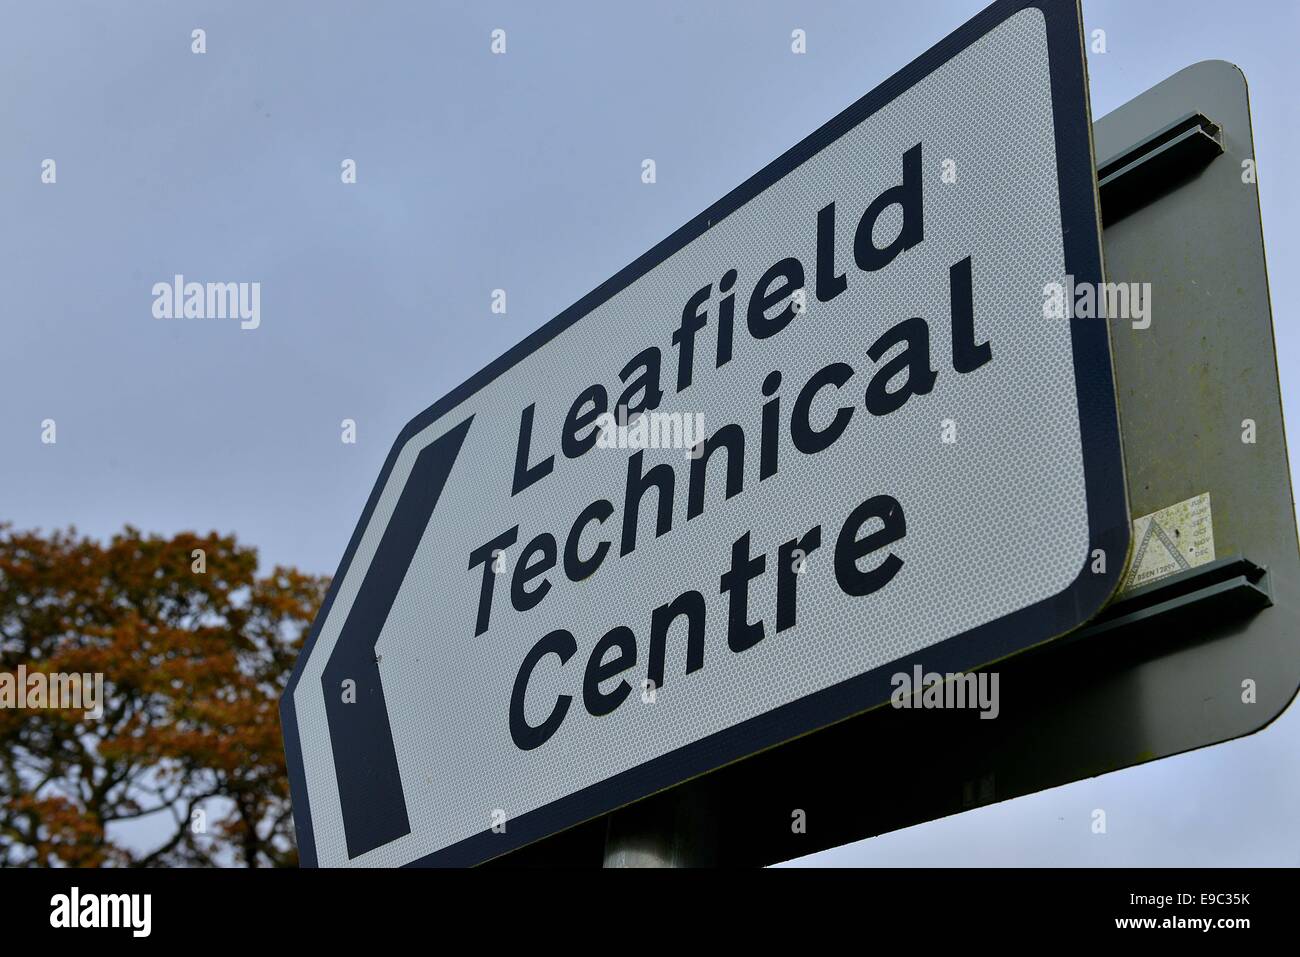 The Leafield Technical Centre sign as Caterham F1 Team staff were locked out. PICTURE BY SIMON WILLIAMS 23/10/14 PICTURE CATCHLINE Caterham F1 Lockout LENGTH lead REQUESTED BY Lucy Ford Stock Photo